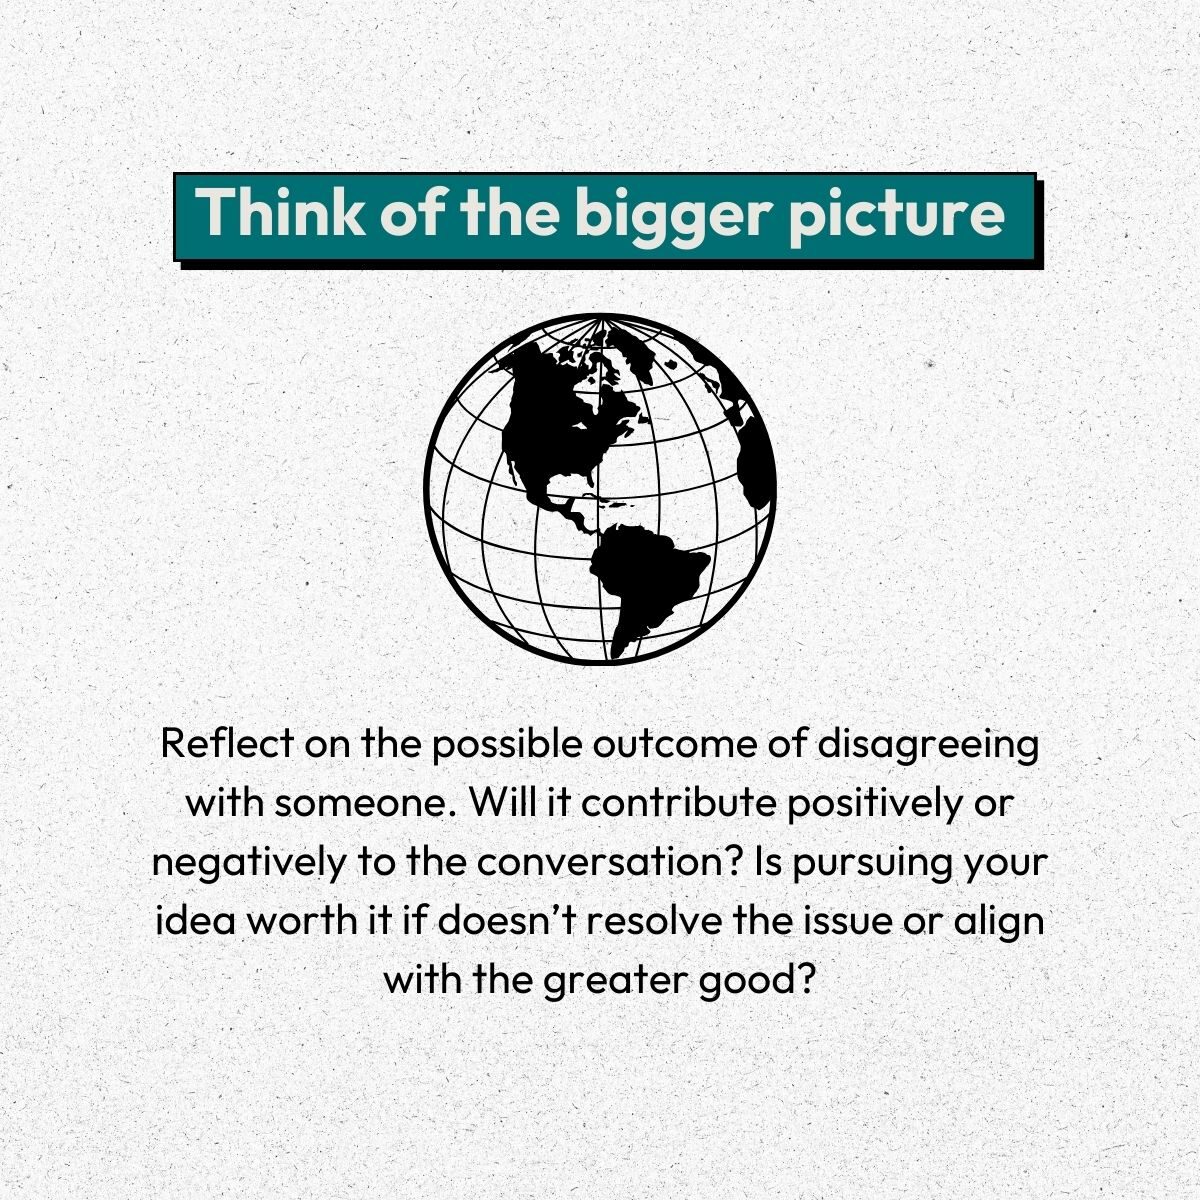 Before you disagree with someone think of the bigger picture